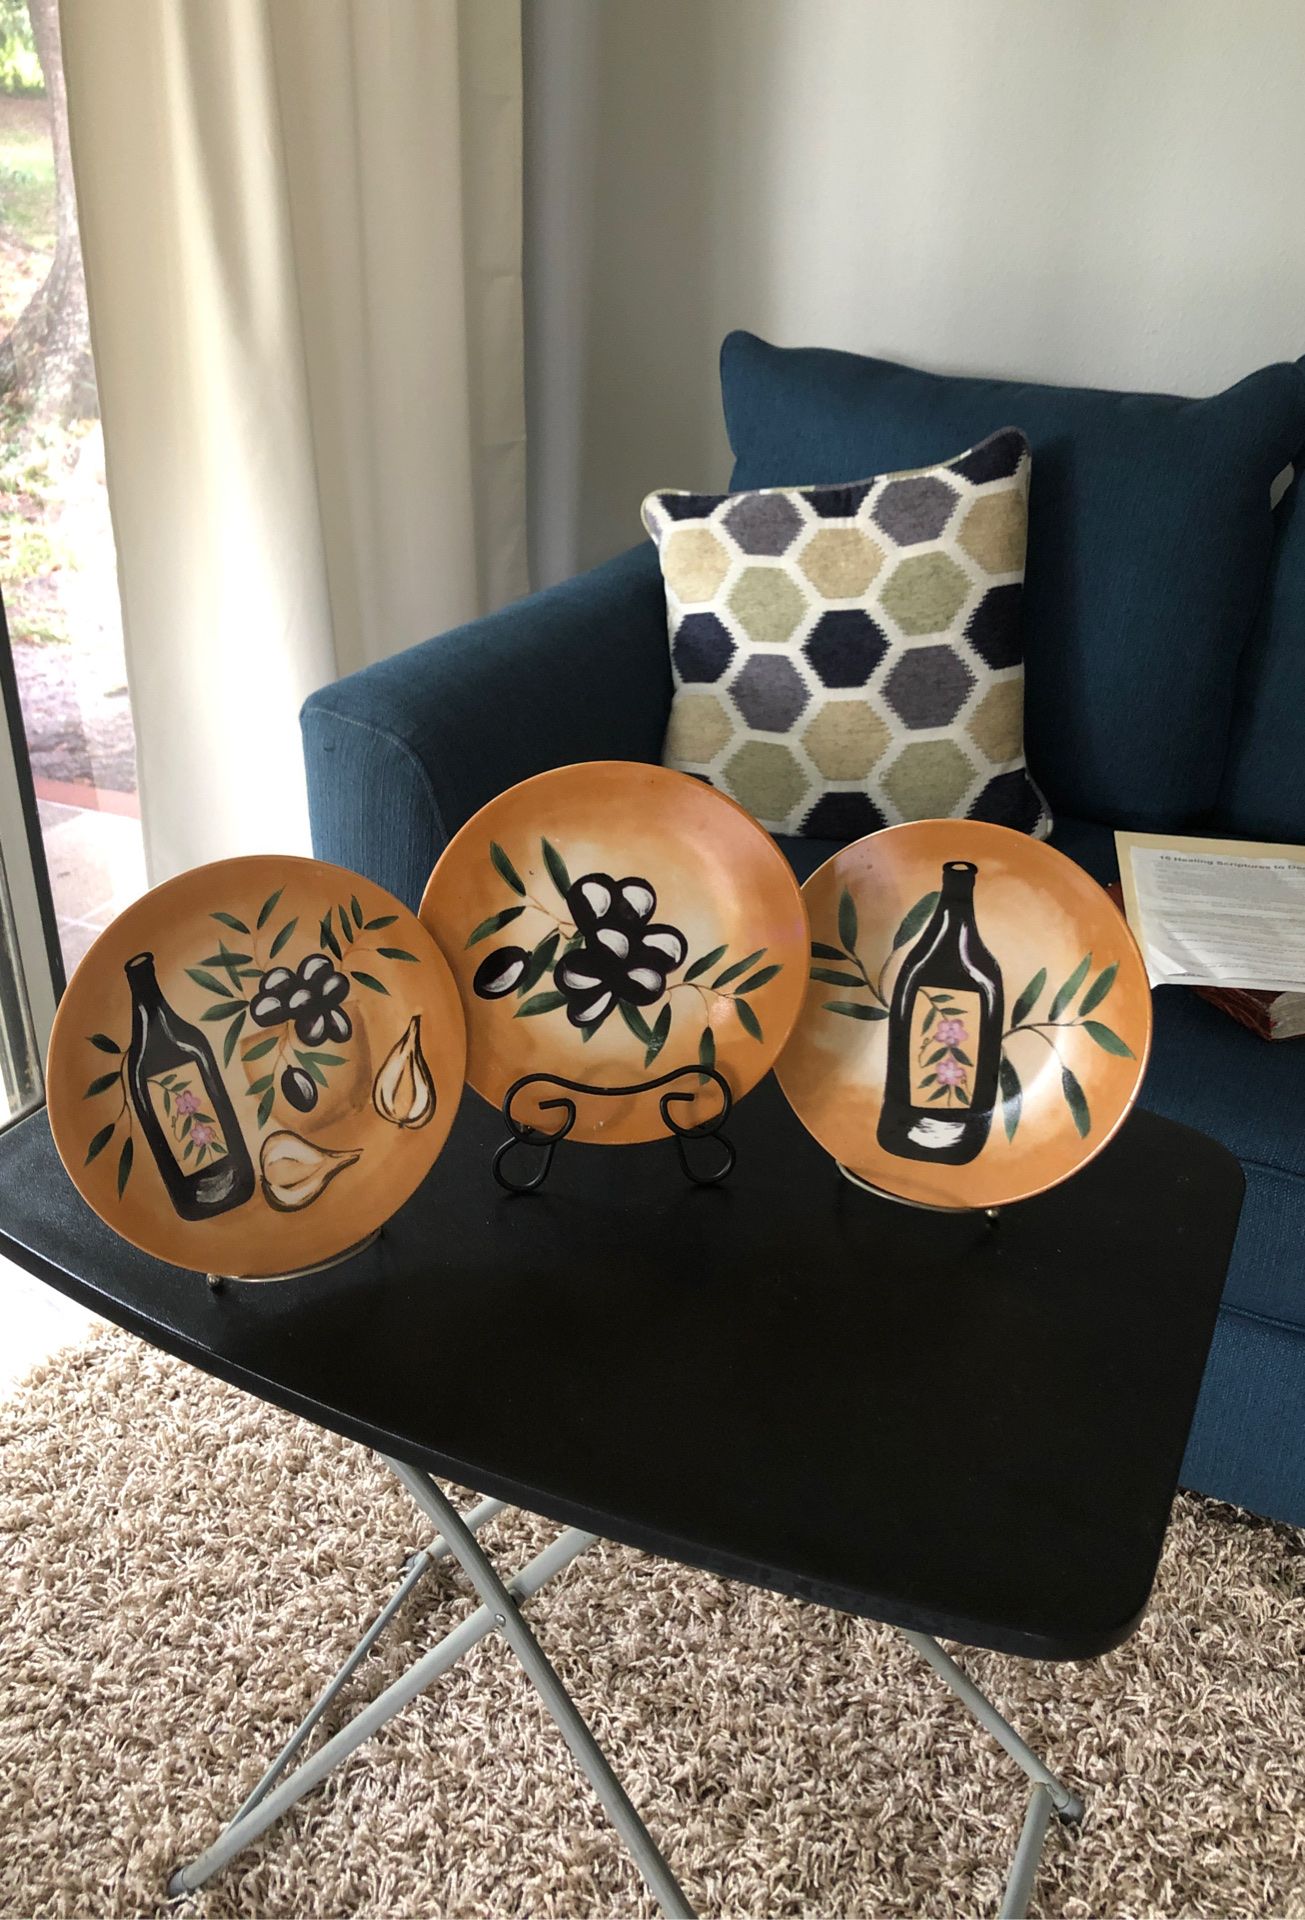 Three oil paint dishes for decorative purposes.